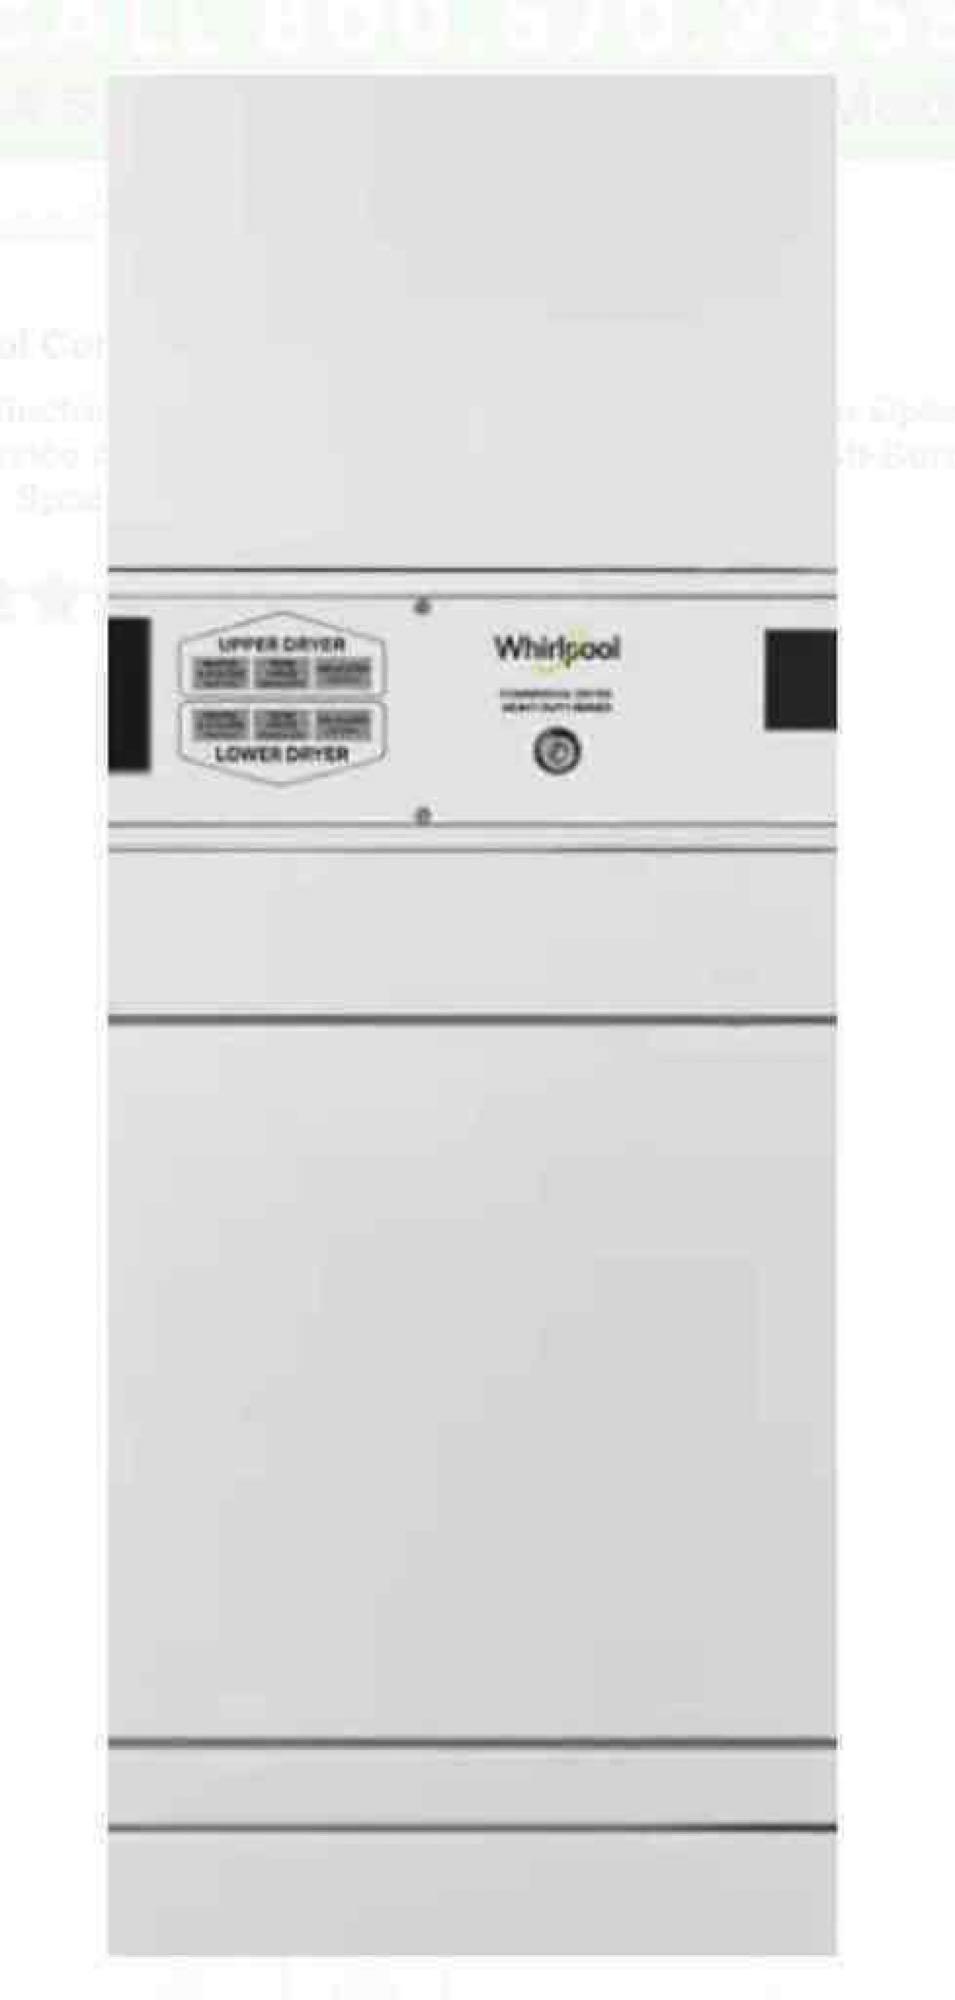 Whirlpool Commercial ELECTRIC Stack Dryer, Non-Coin